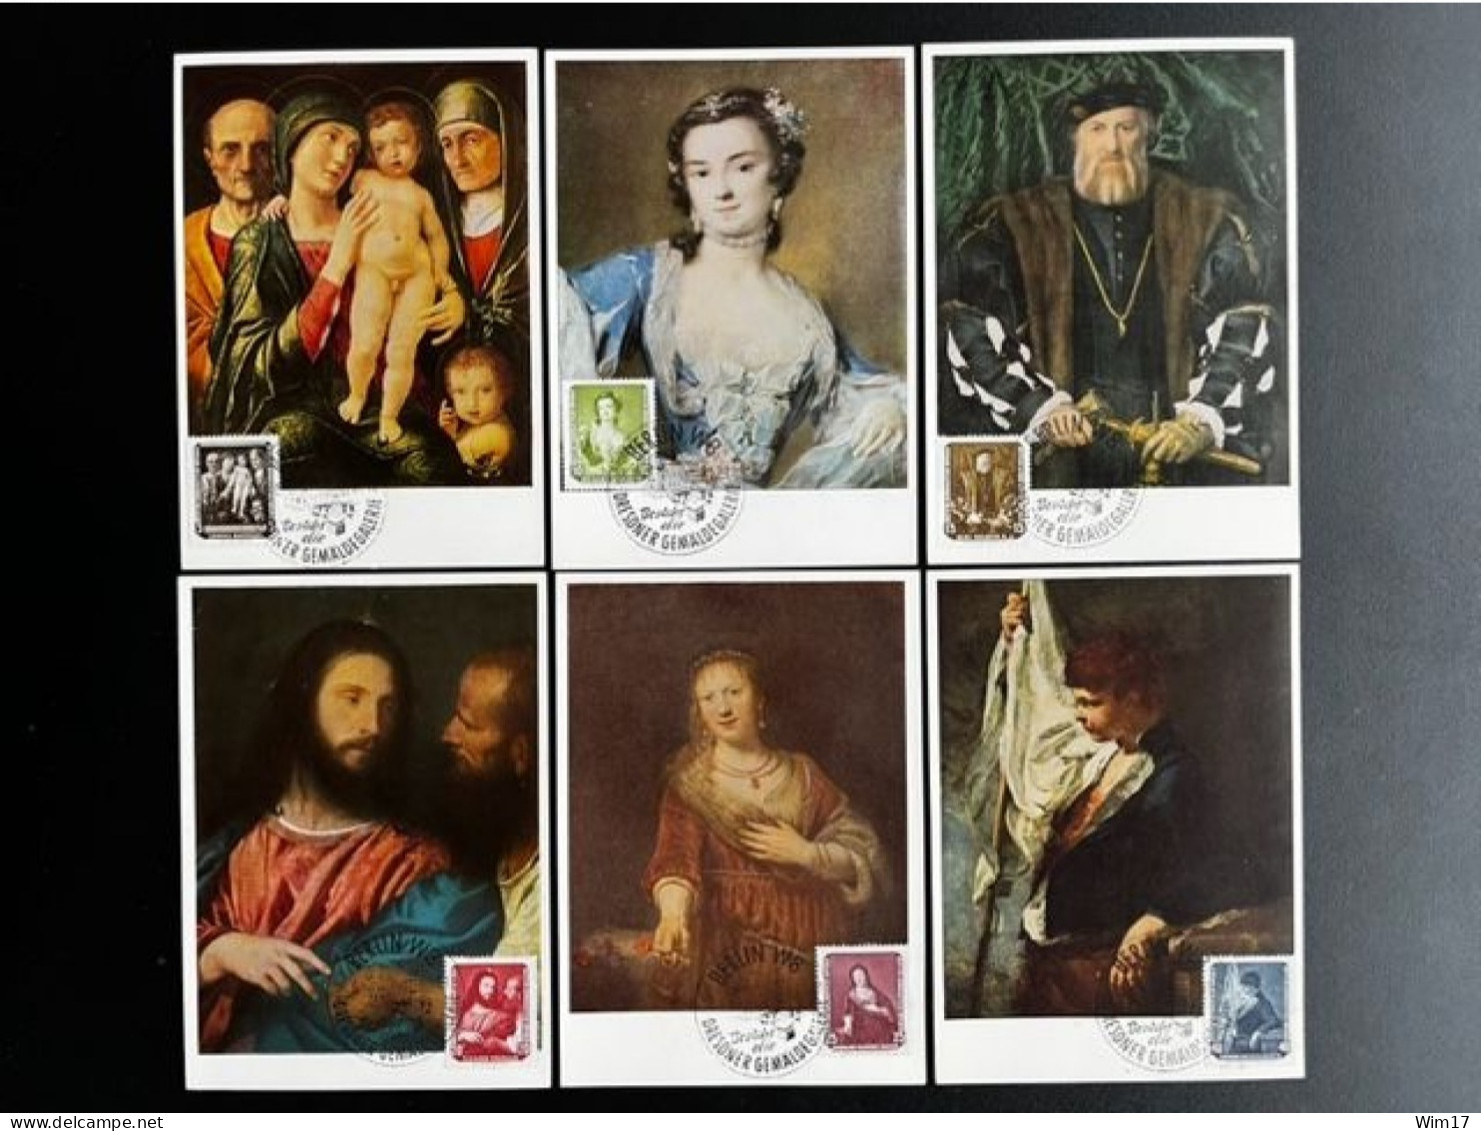 EAST GERMANY DDR 1957 SET OF 6 MAXIMUM CARDS PAINTINGS MI 586/591 26-06-1957 OOST DUITSLAND - Cartas Máxima